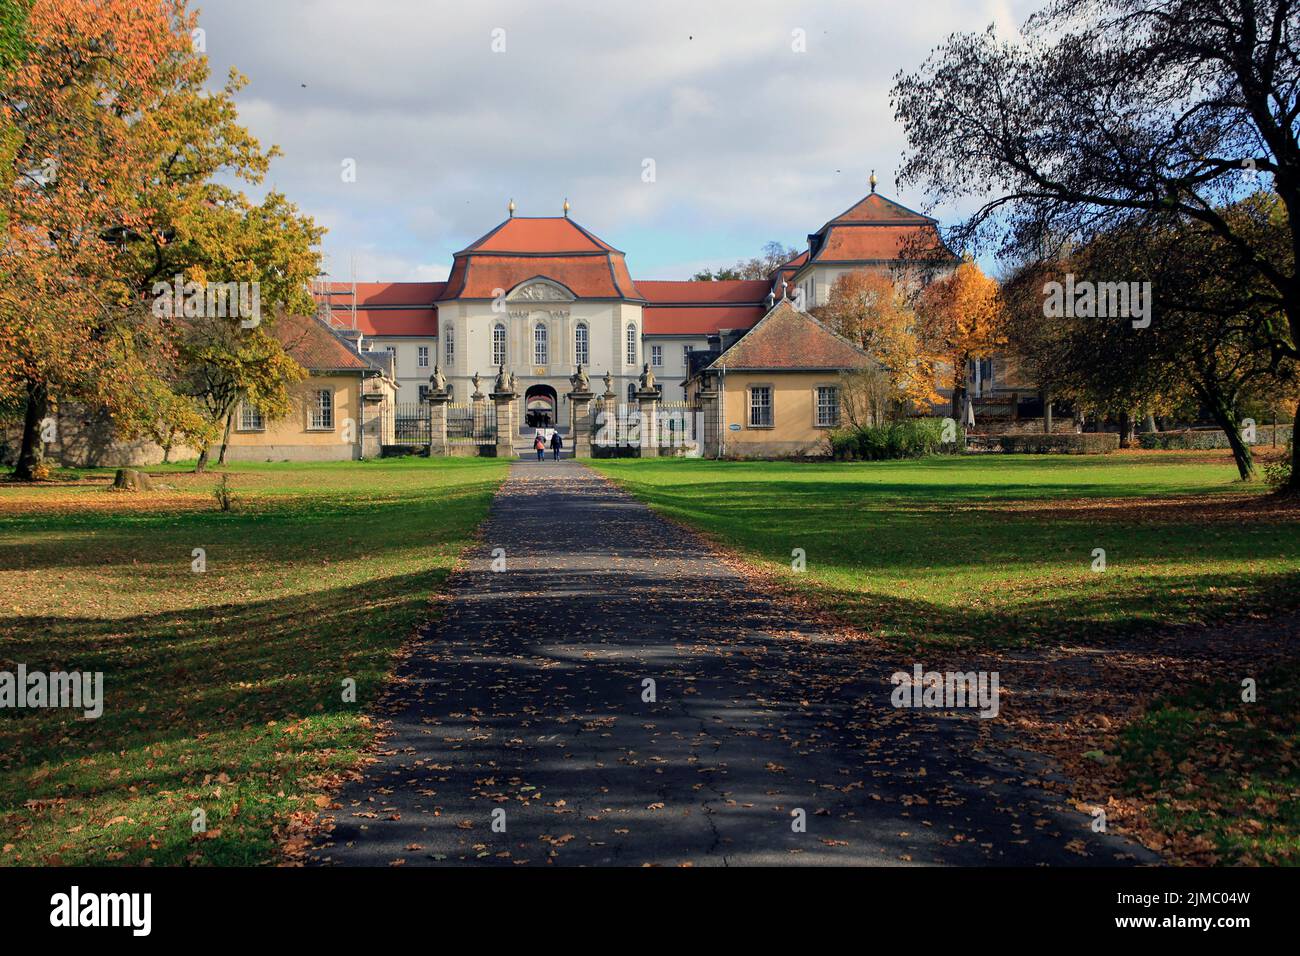 Castle Fasanerie, Eichenzell, Hesse, Germany, Europe Stock Photo